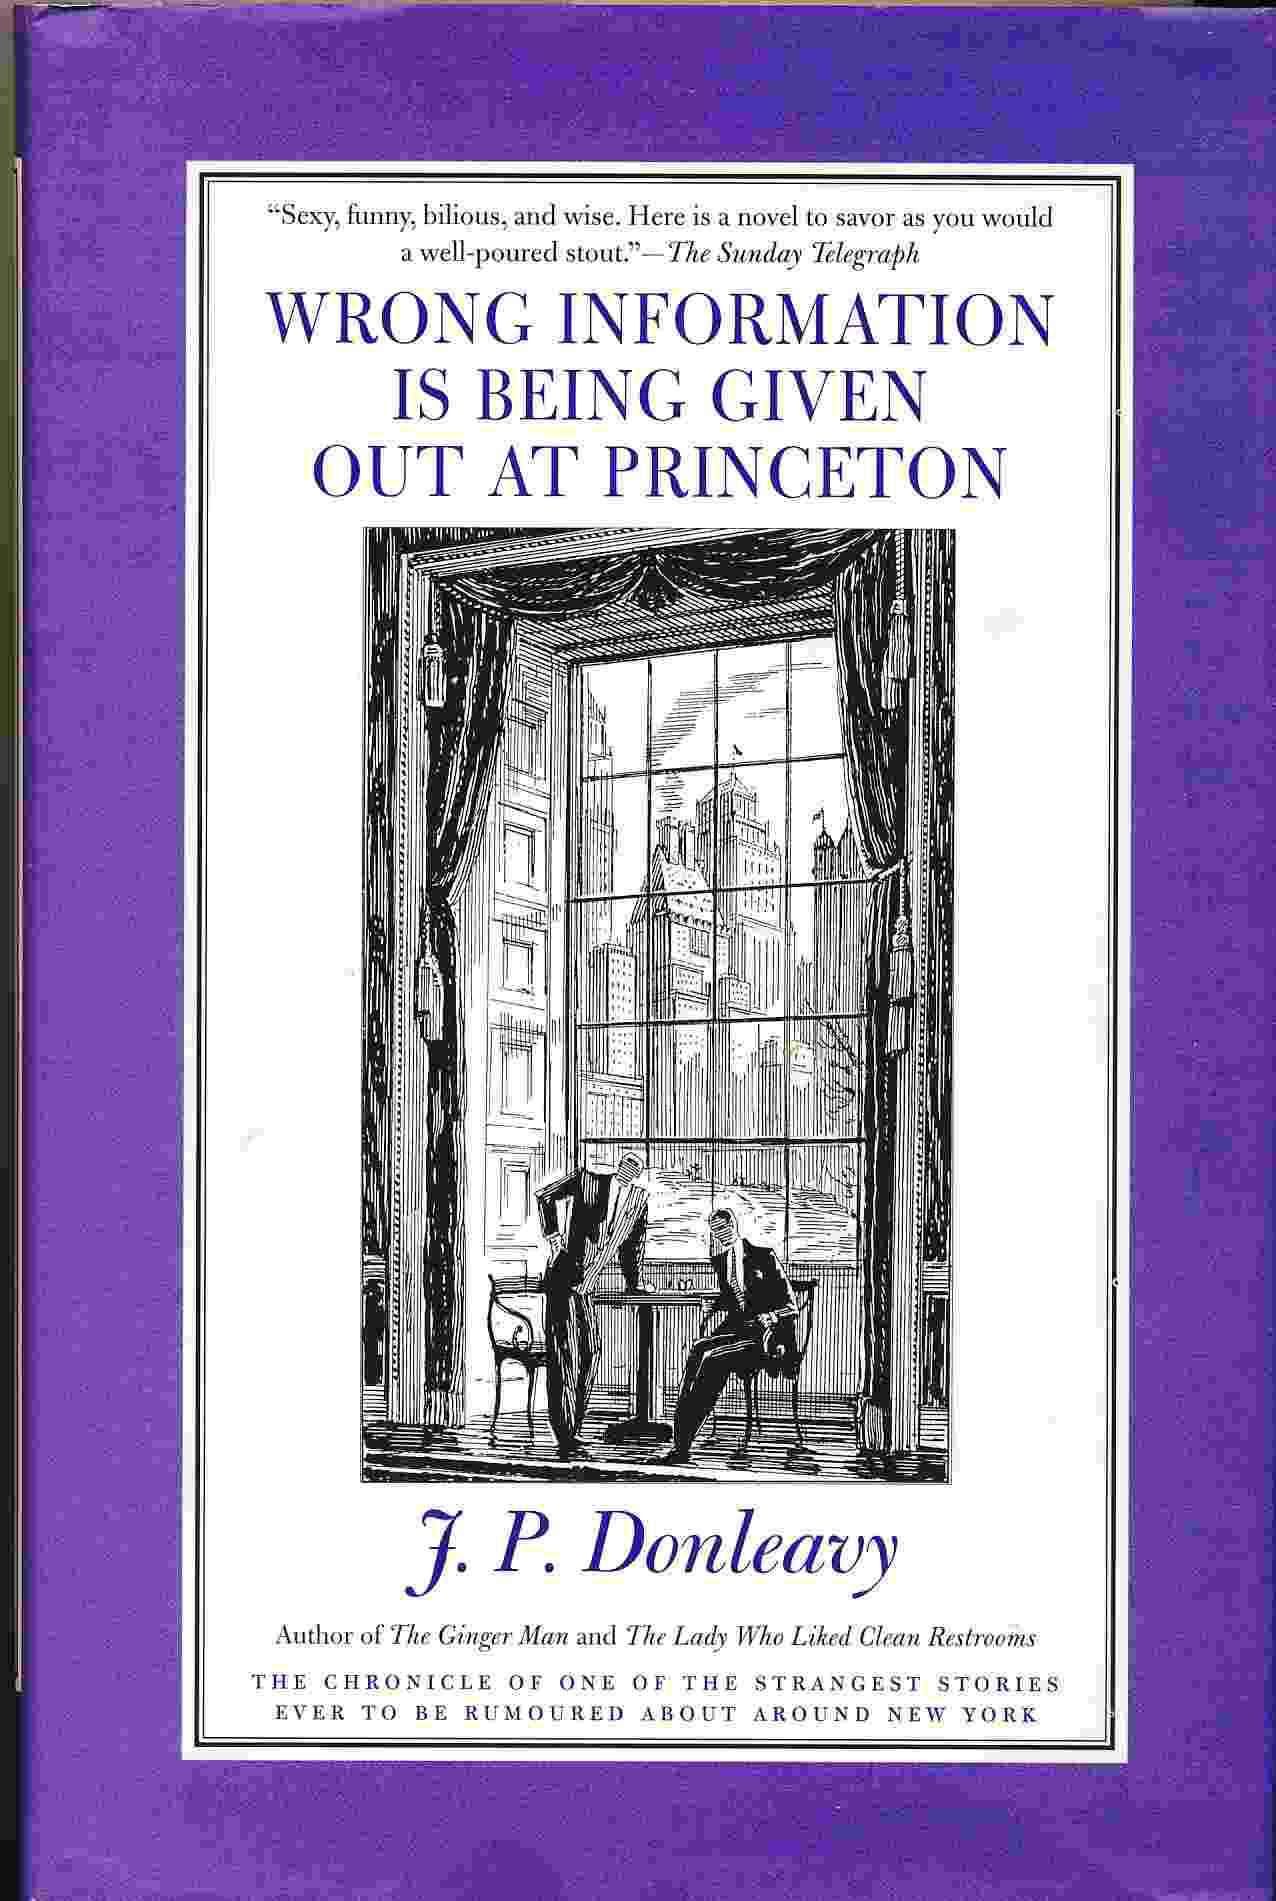 DONLEAVY, J. P. - Wrong Information Is Being Given out at Princeton the Chronicle of One of the Strangest Stories Ever to Be Rumoured About Around New York